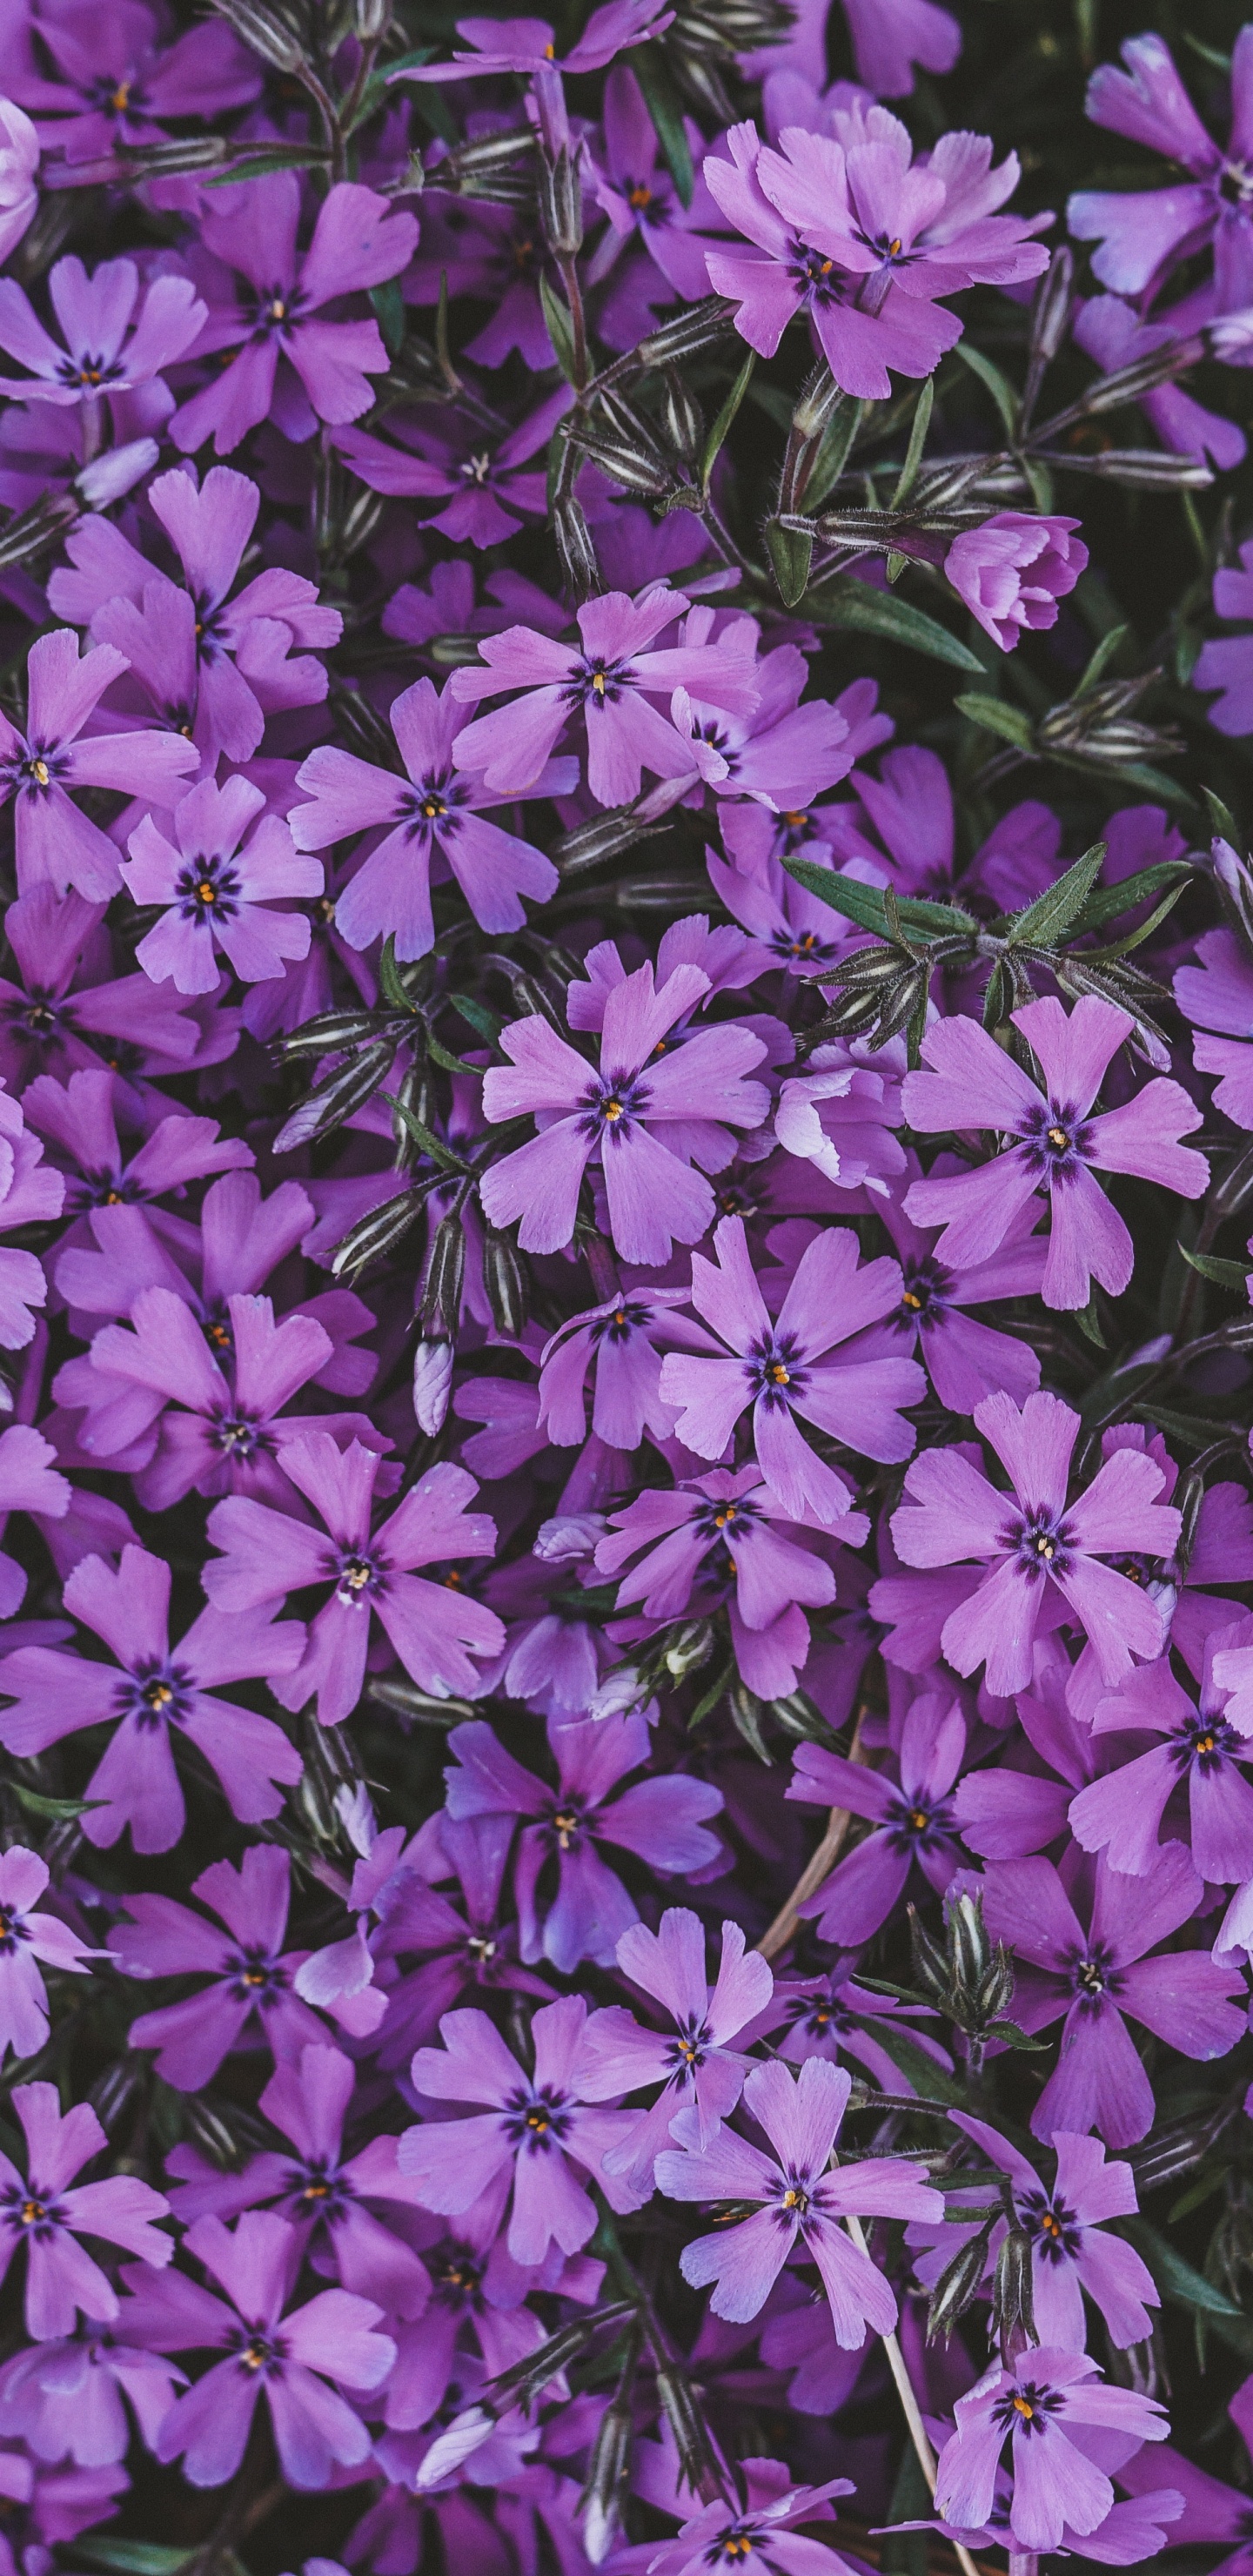 Purple Flowers With Green Leaves. Wallpaper in 1440x2960 Resolution